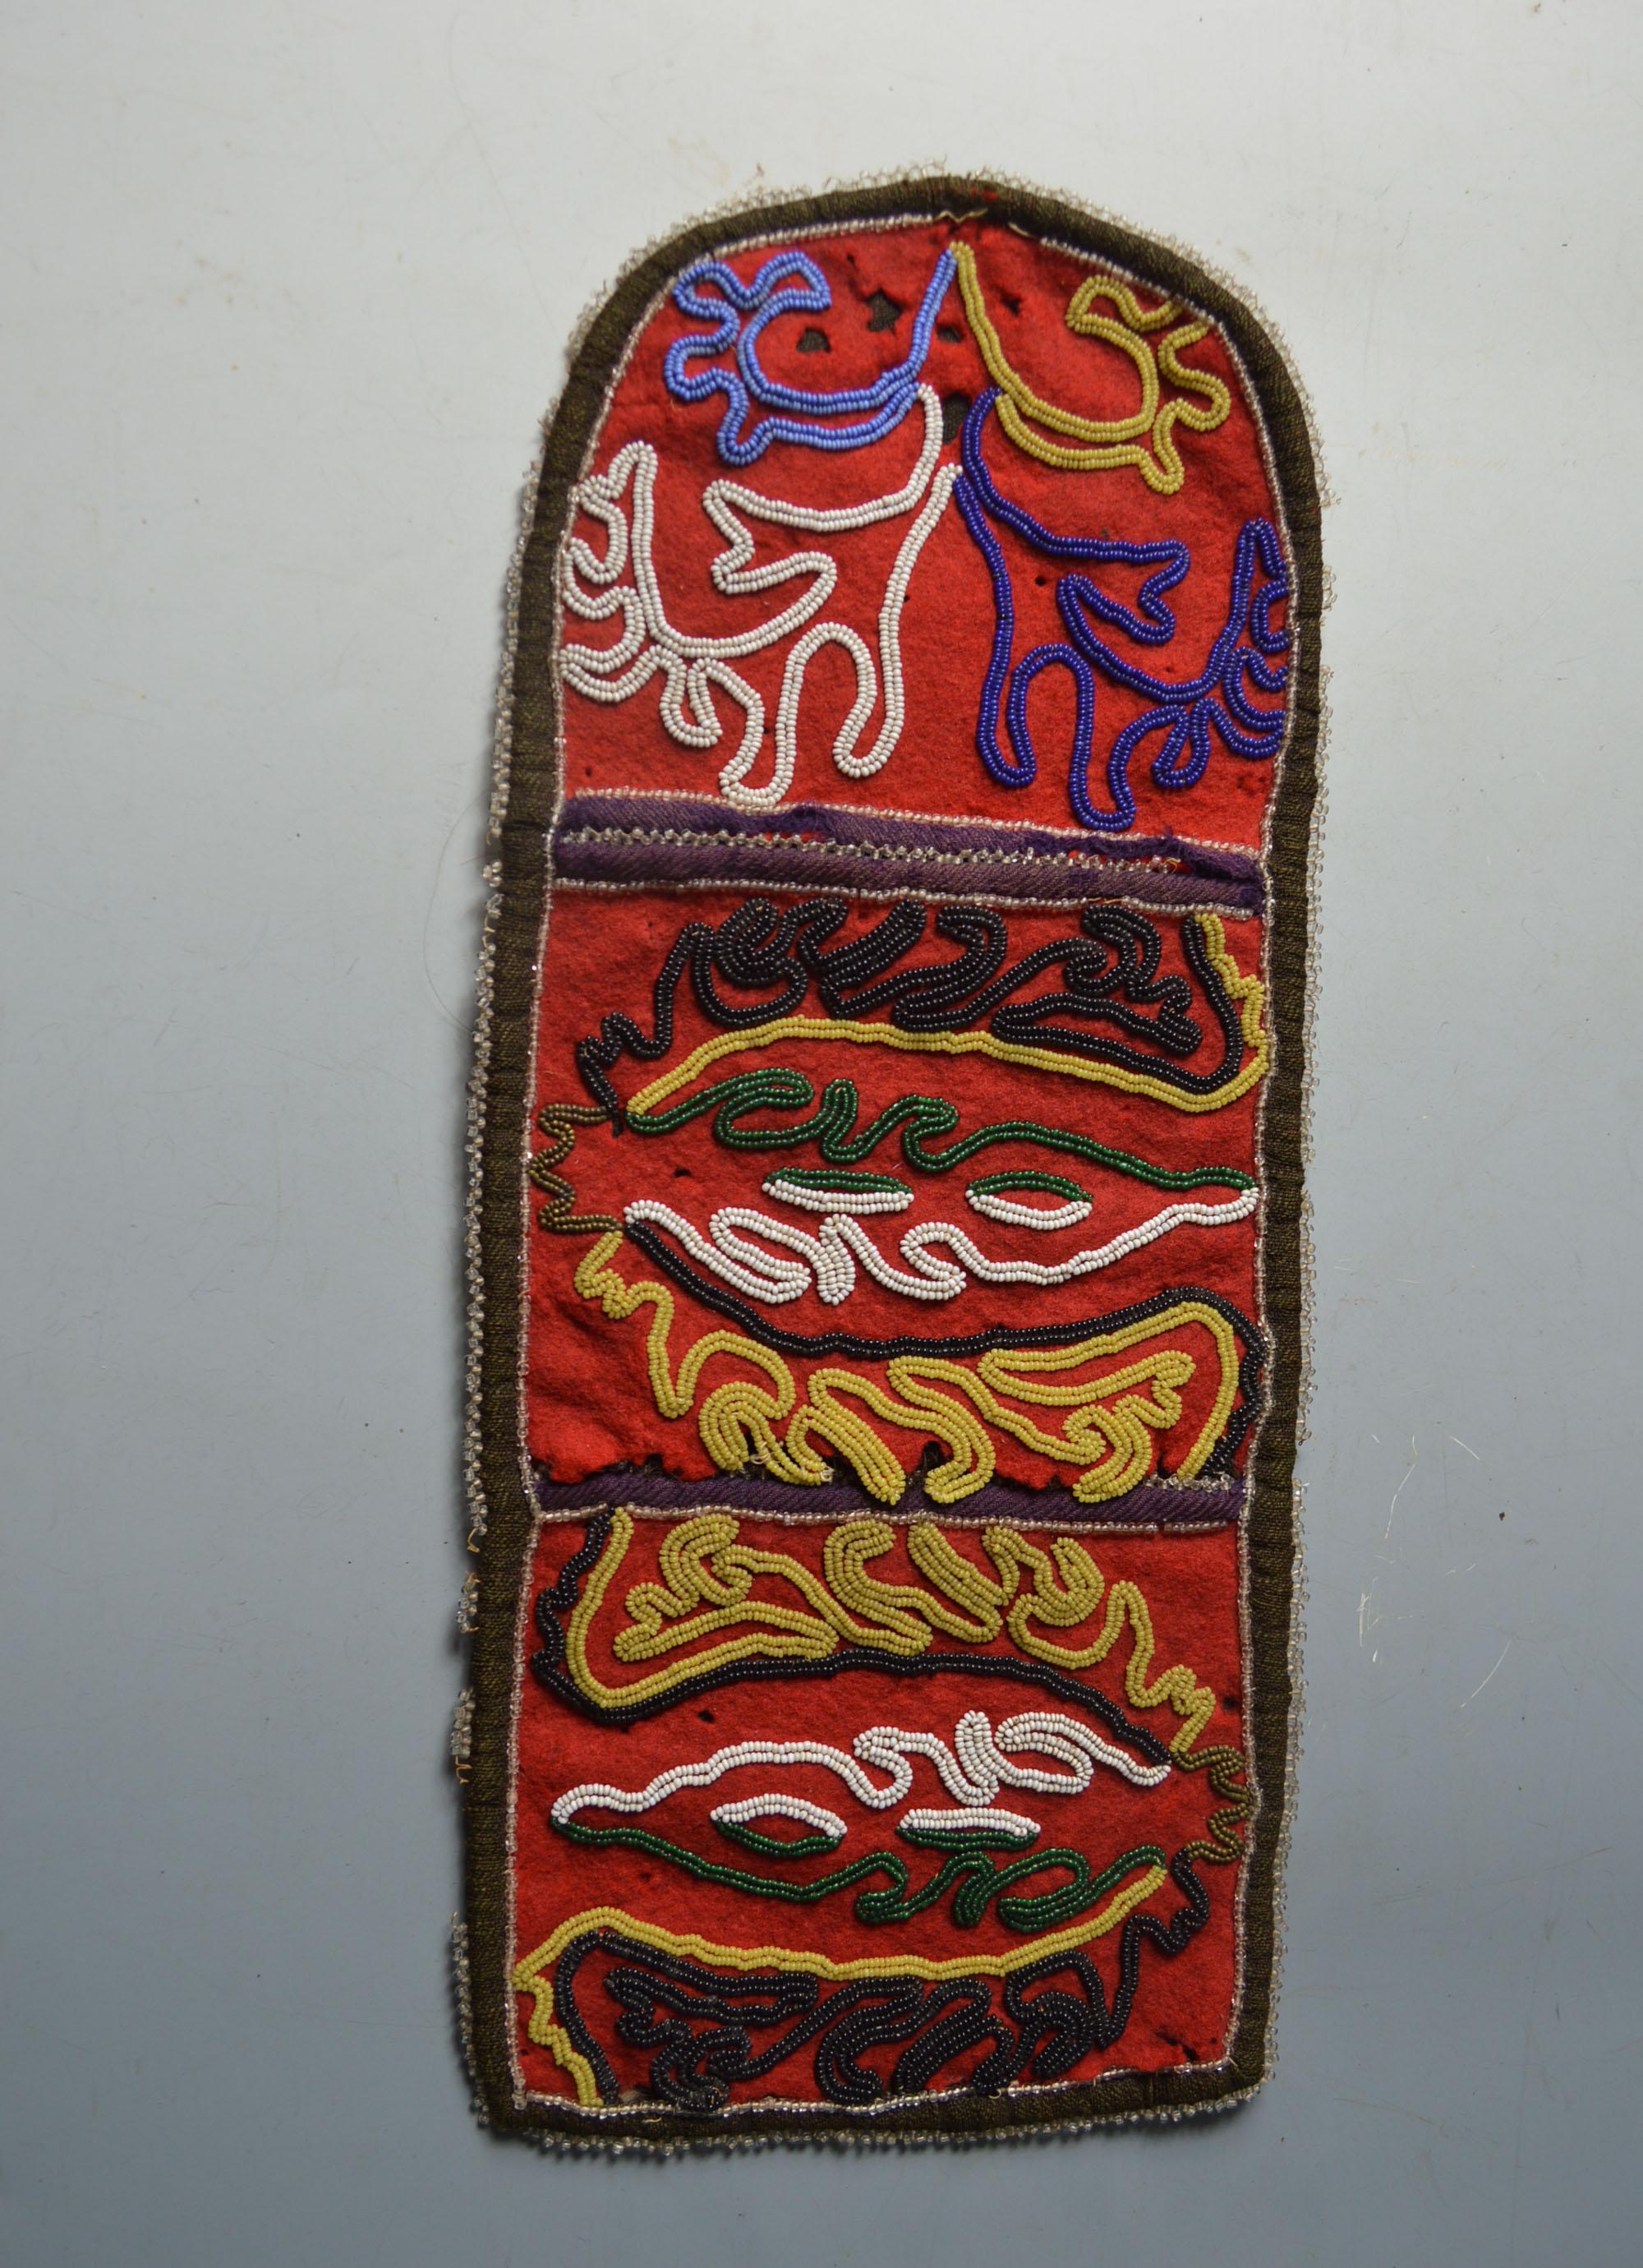 Native American Tlingit Beaded Pouch or Wall Pocket In Good Condition For Sale In London, GB